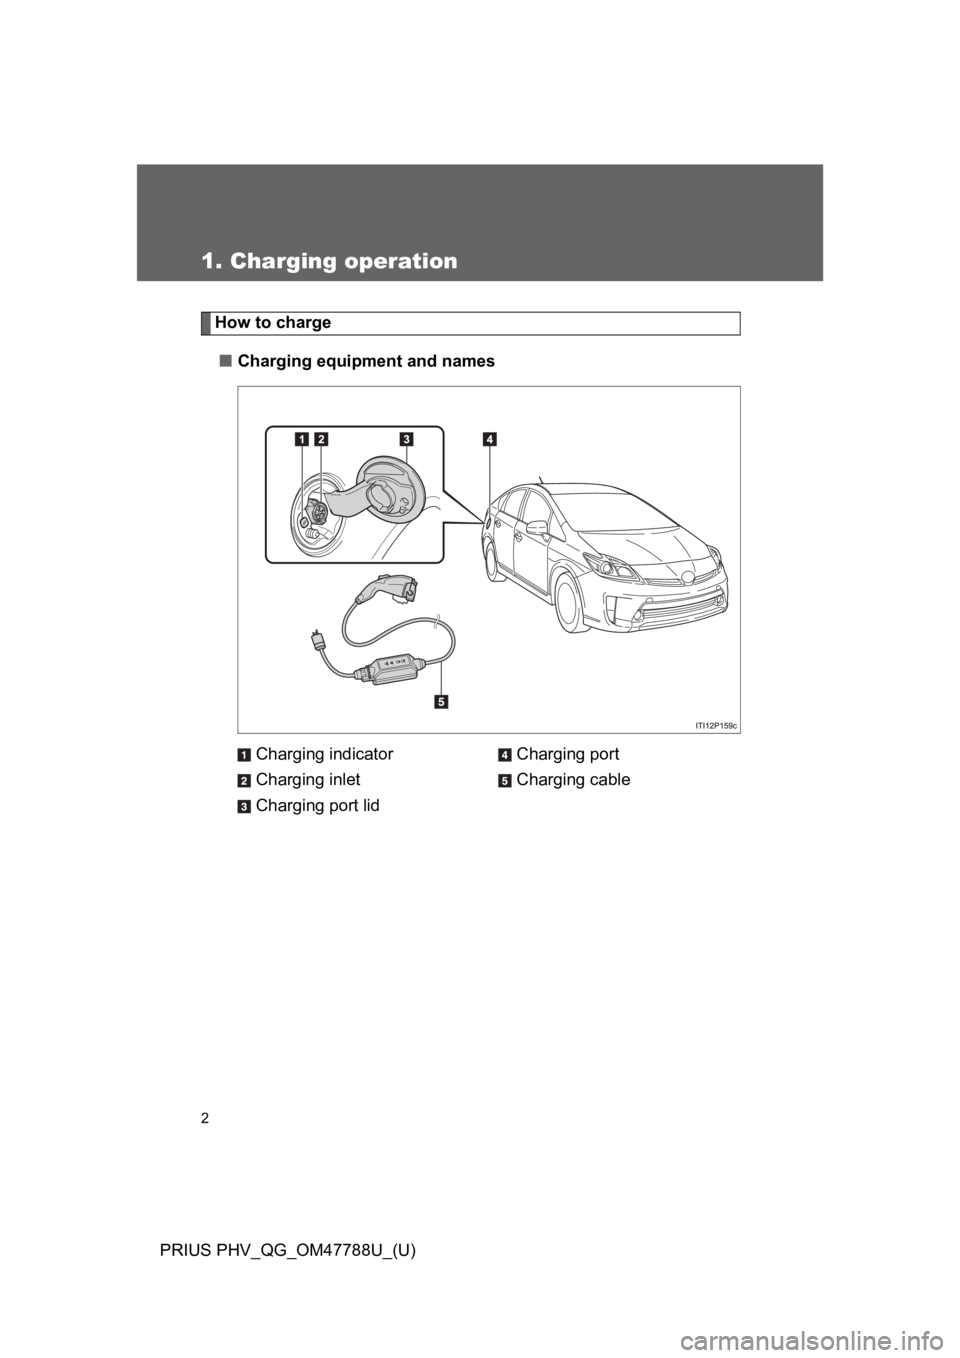 TOYOTA PRIUS PLUG-IN 2013  Owners Manual 2
PRIUS PHV_QG_OM47788U_(U)
1. Charging operation
How to charge
■Charging equipment and names
Charging indicator
Charging inlet
Charging port lid
Charging port
Charging cable 